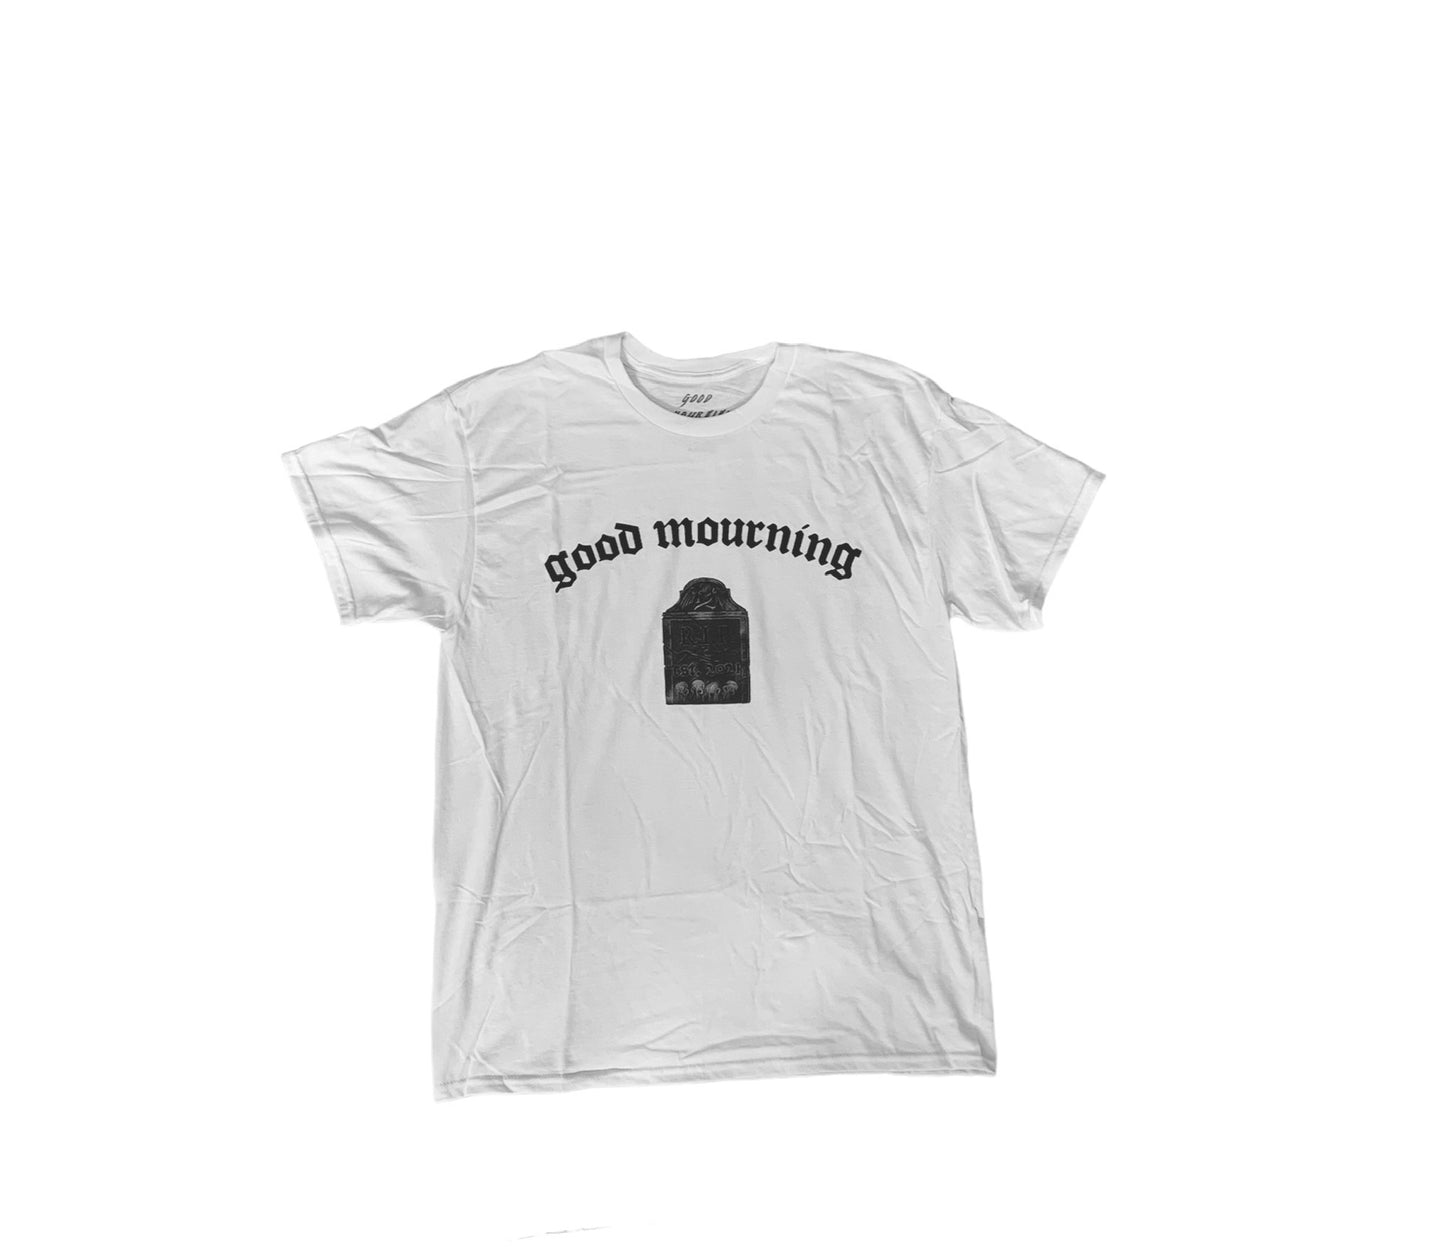 "TOMBSTONE T-SHIRT'